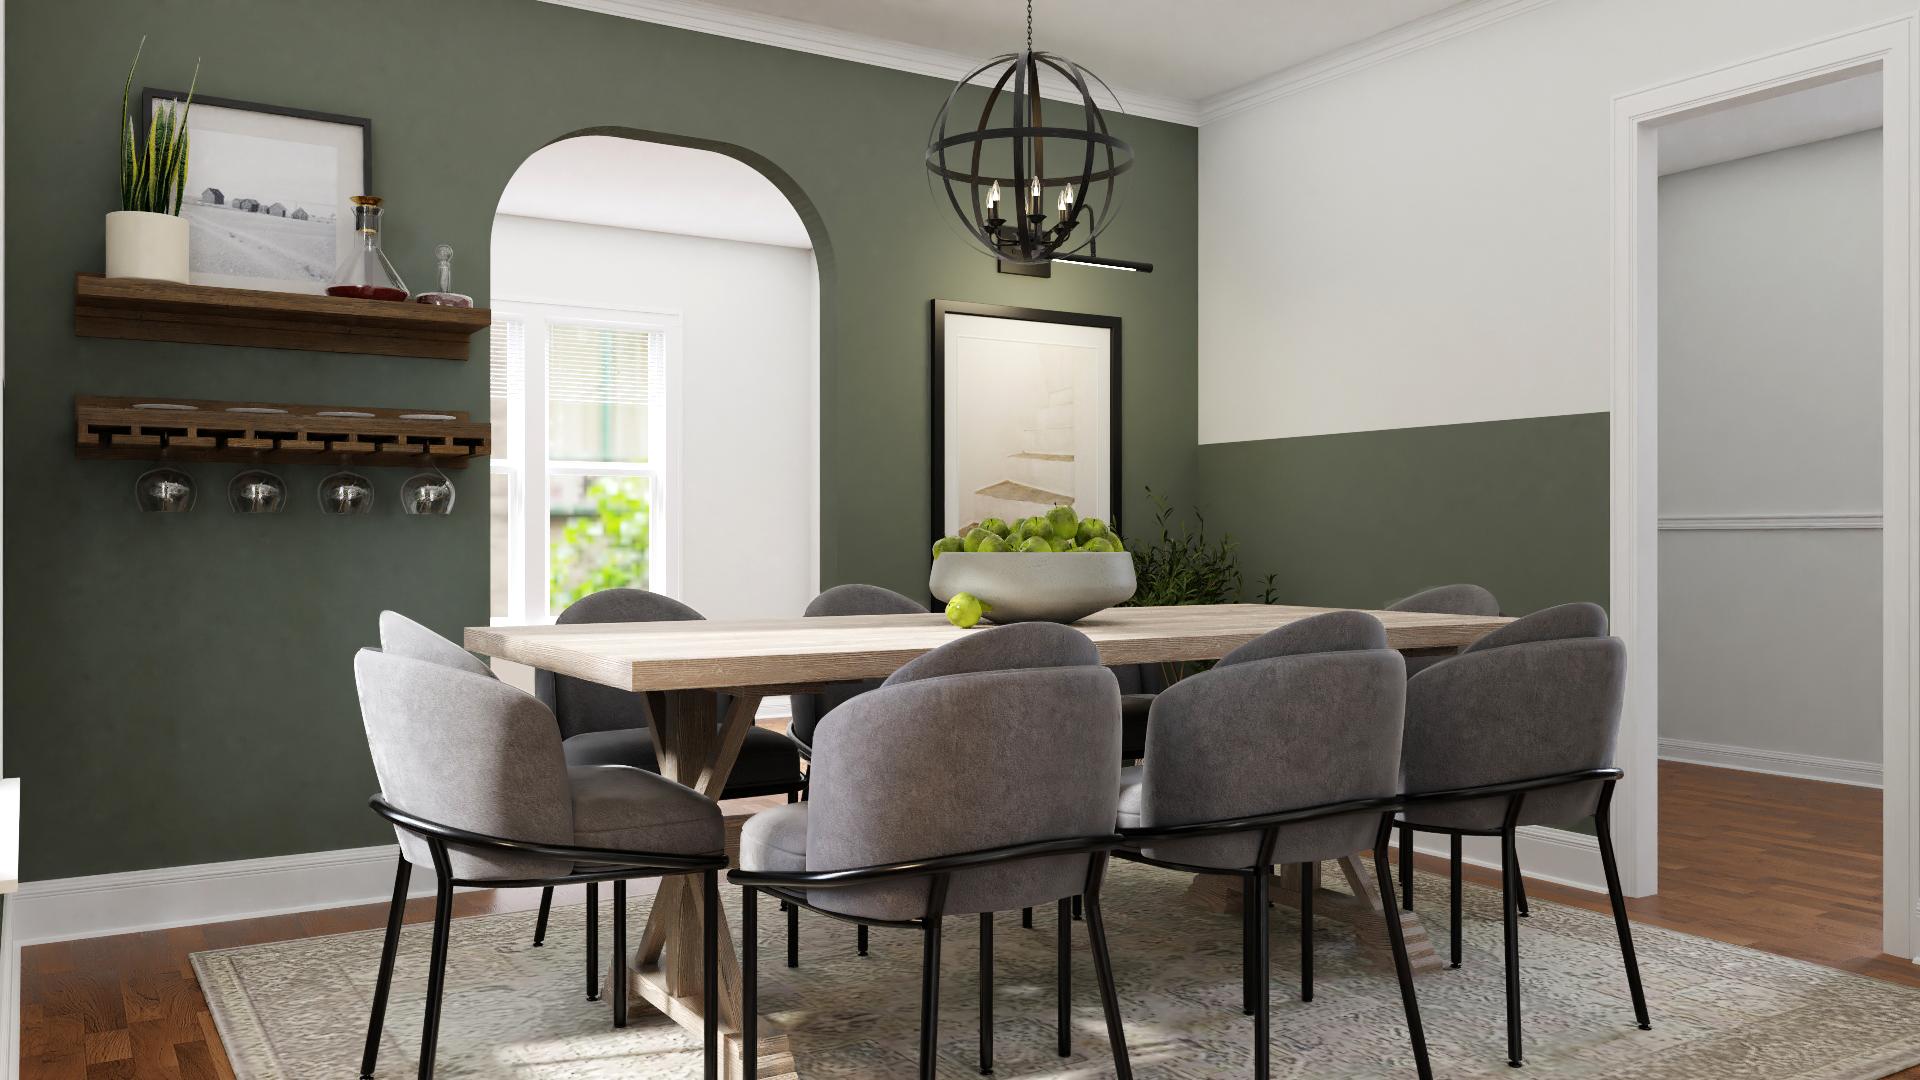 A Dining Room Worthy of Gatherings